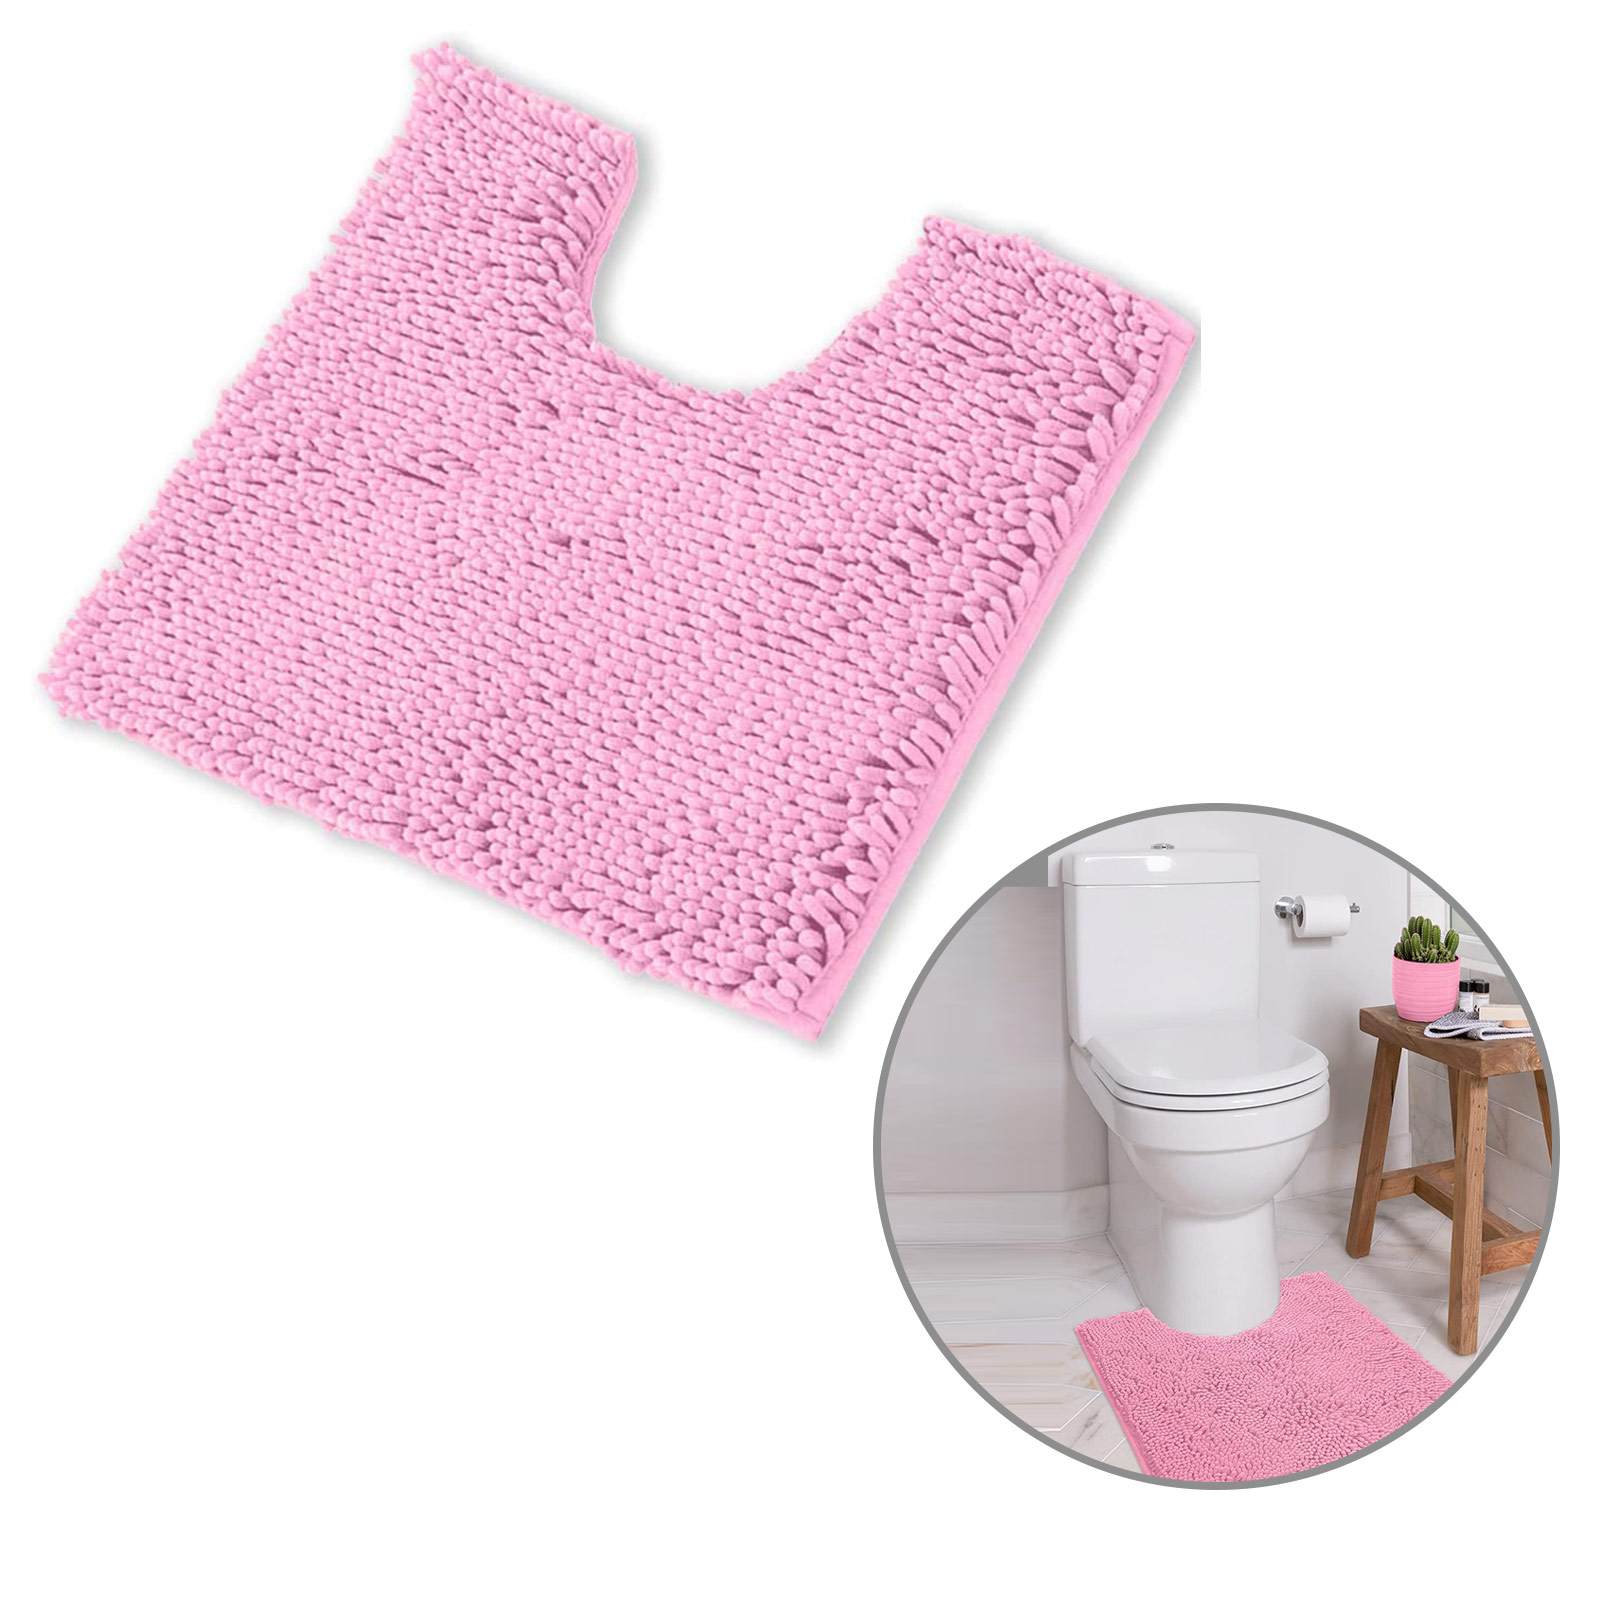 Tripumer Bath Rugs U-Shaped Toilet Mats Ultra Soft Non Slip and Absorbent Chenille Contour Bath Rug 20x20 inch Bathroom Rugs Pink Plush Bath Mats Machine Wash and Dry - image 1 of 6